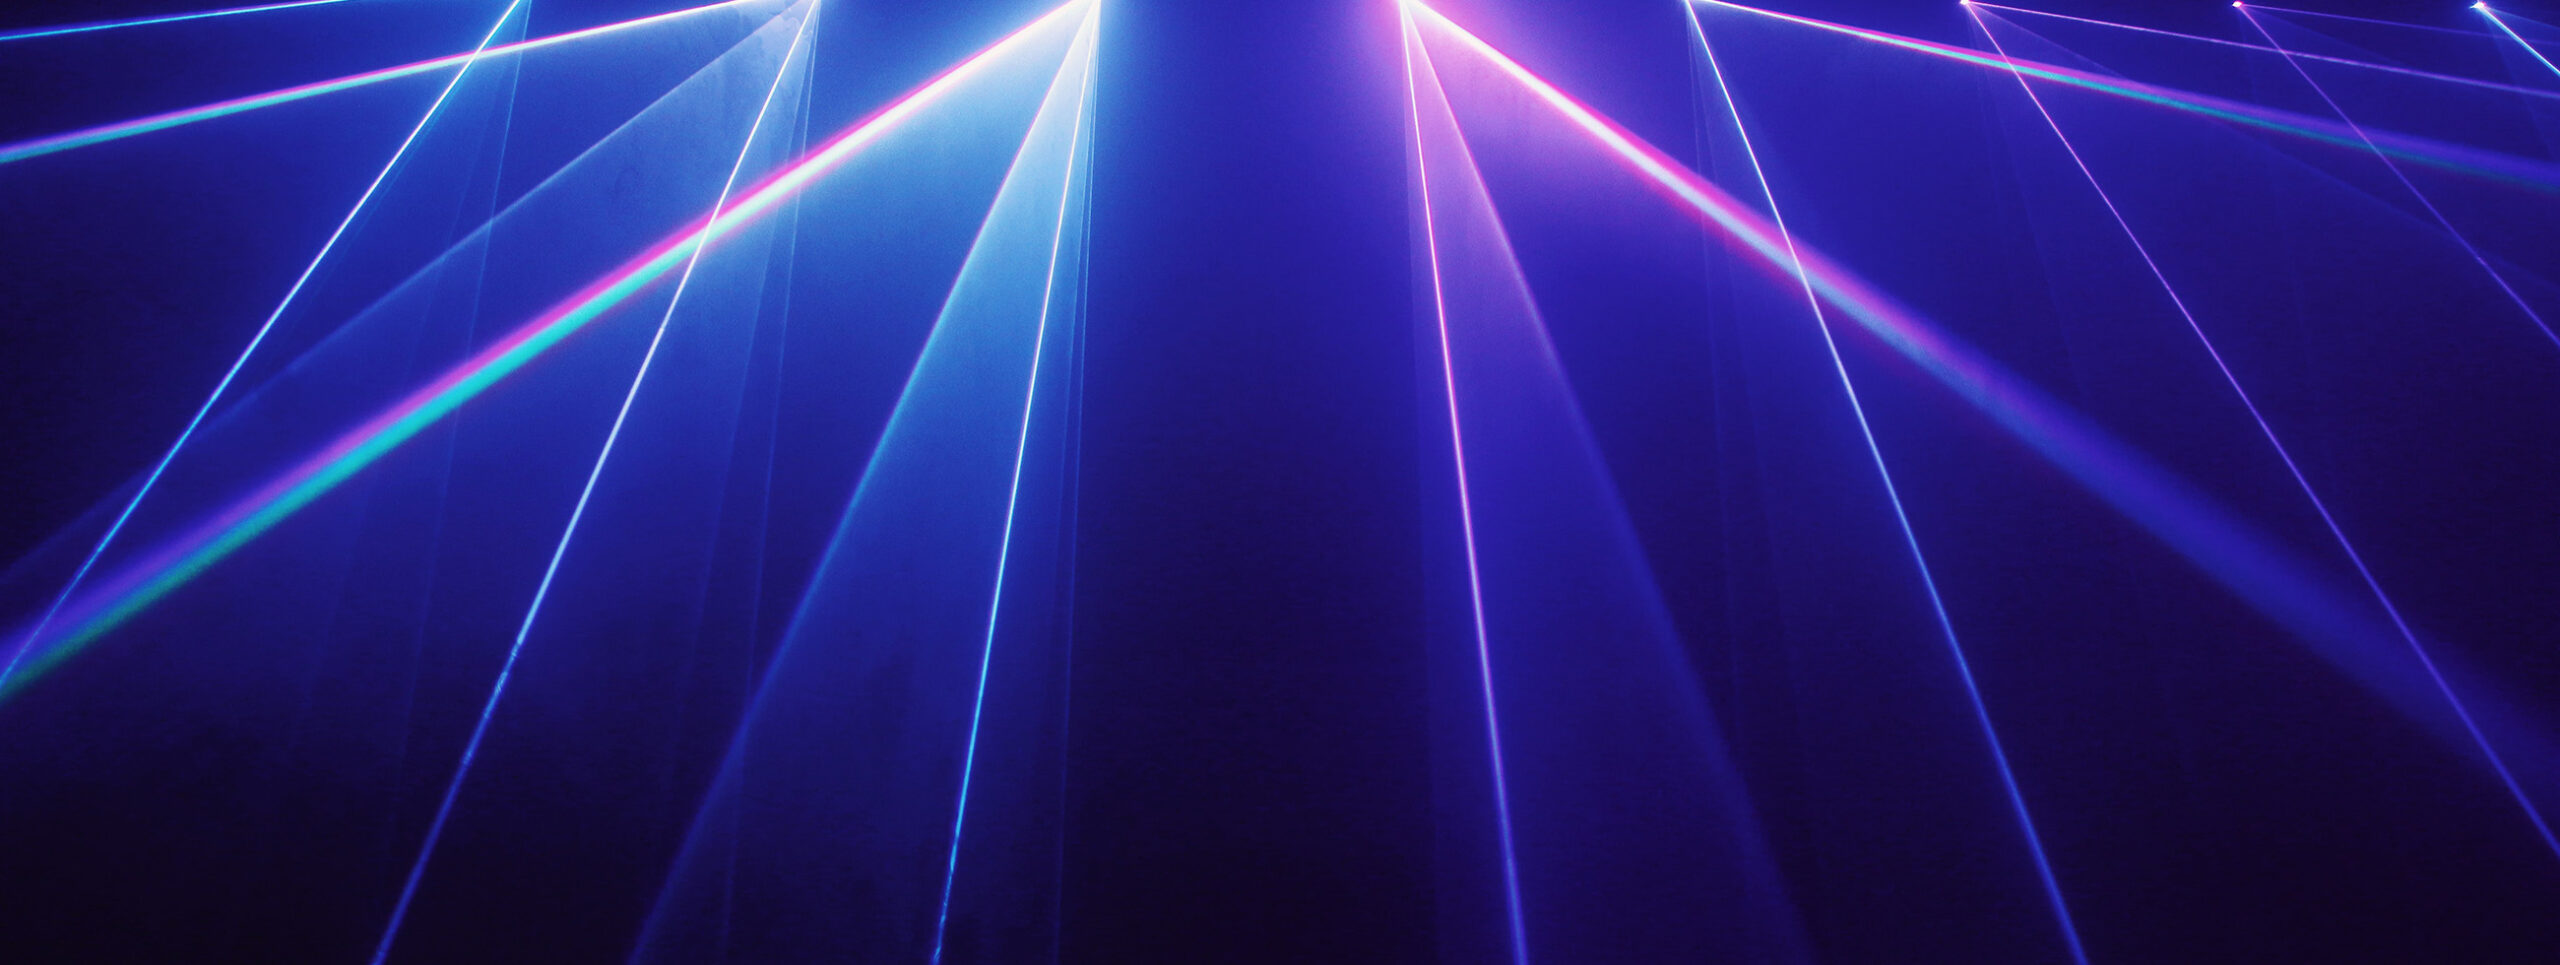 Laser lights in various colors on a blue background